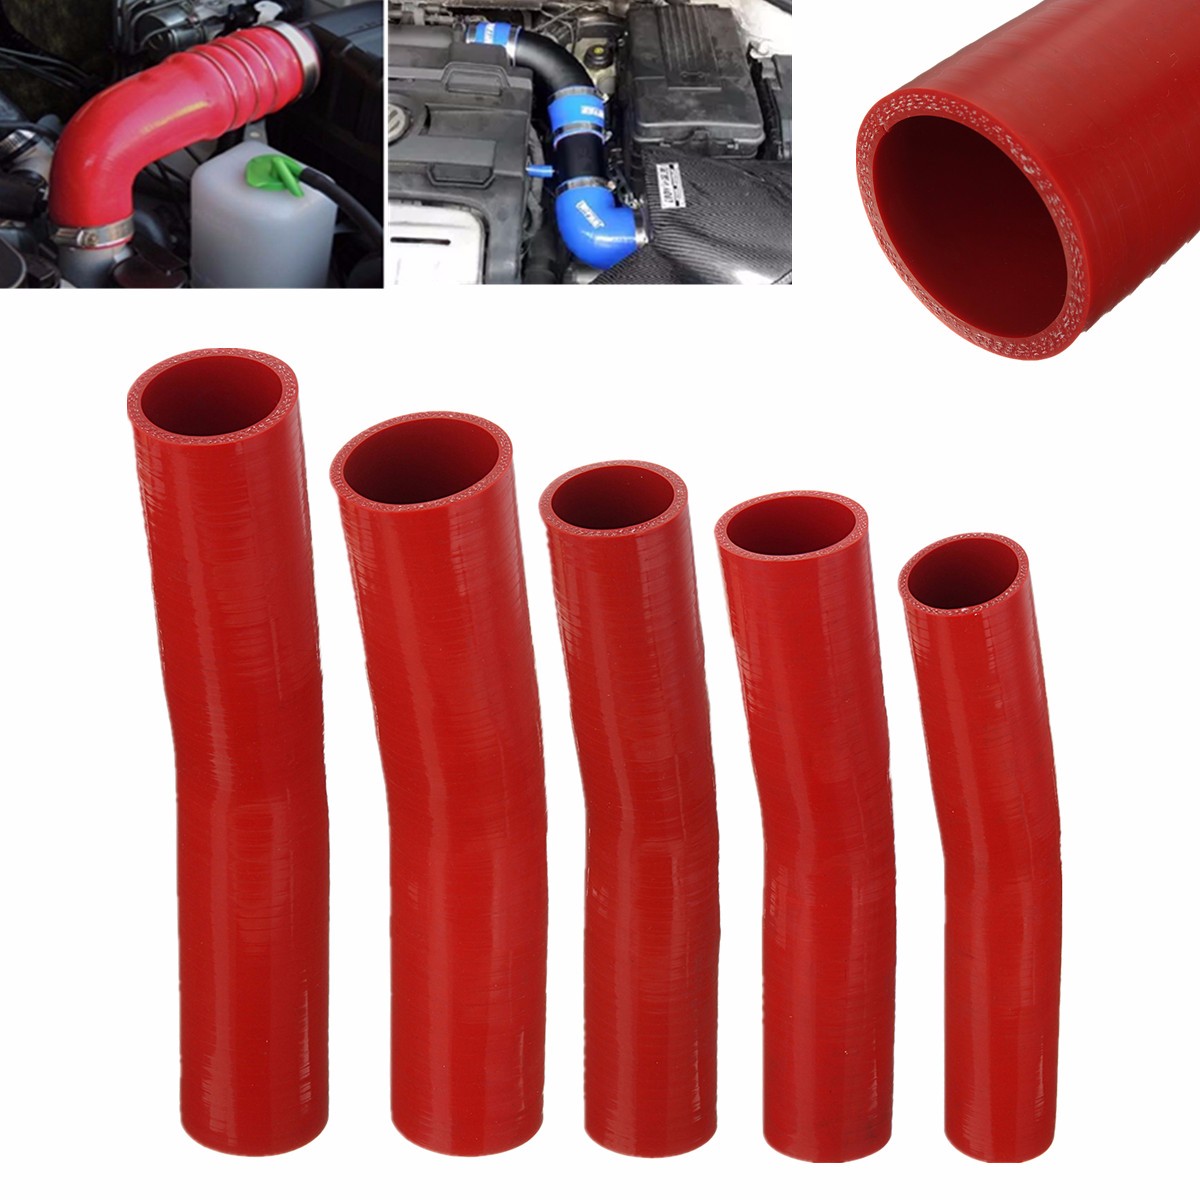 Auto-Silicone-Hoses-Rubber-15-Degree-Elbow-Bend-Hose-Air-Water-Coolant-Joiner-Pipe-Tube-1197015-4